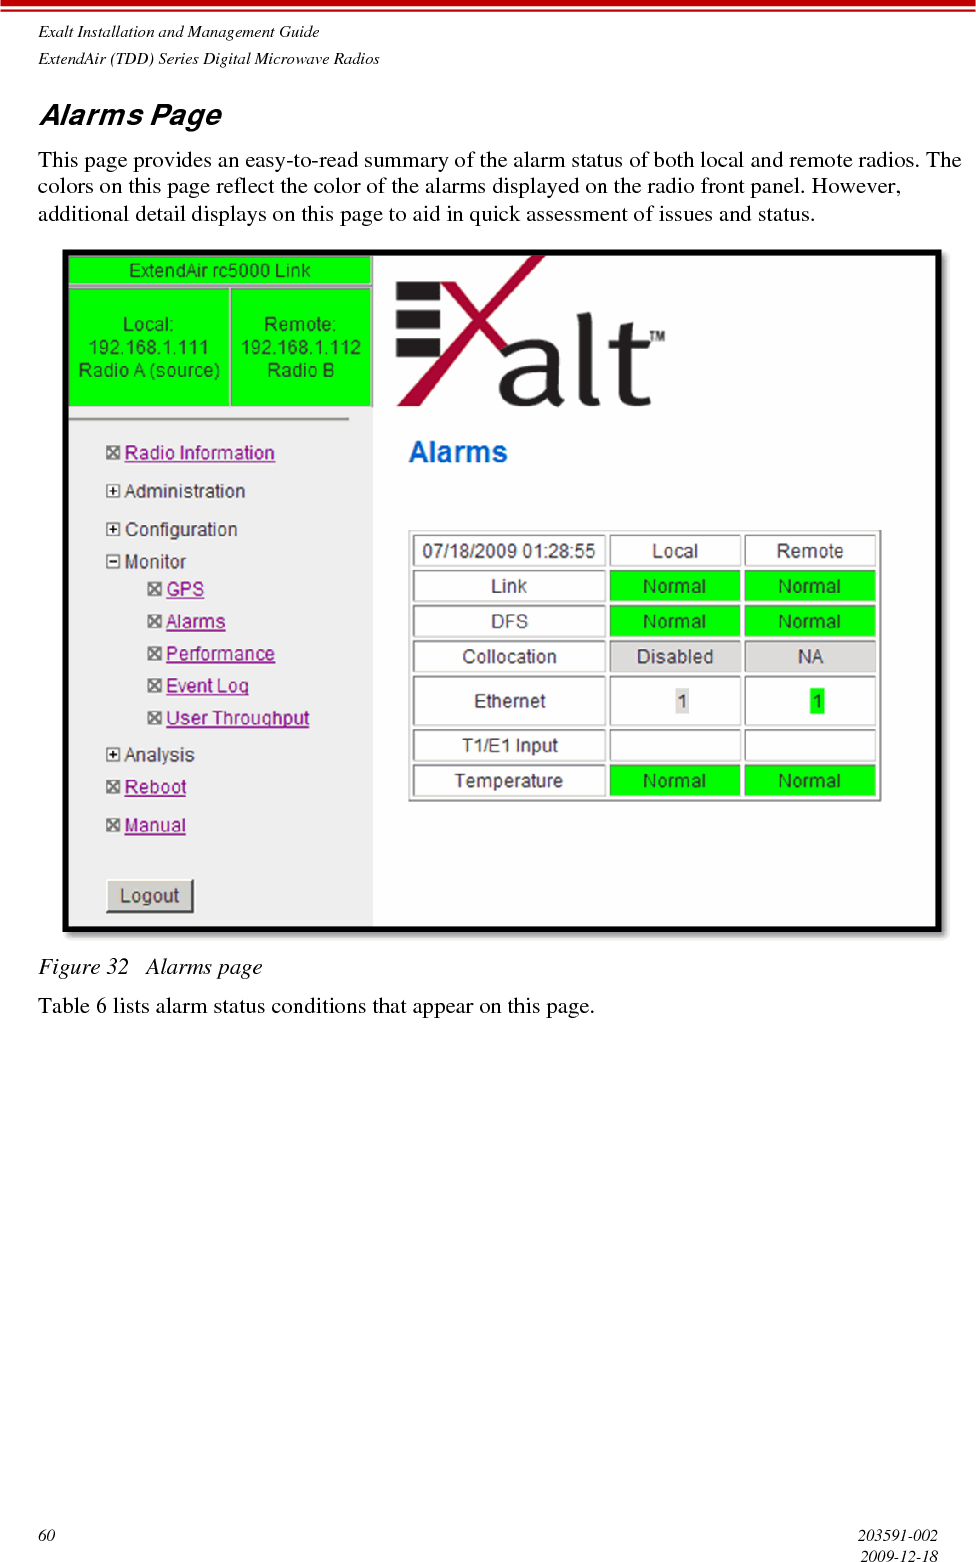 Exalt Installation and Management GuideExtendAir (TDD) Series Digital Microwave Radios60 203591-0022009-12-18Alarms PageThis page provides an easy-to-read summary of the alarm status of both local and remote radios. The colors on this page reflect the color of the alarms displayed on the radio front panel. However, additional detail displays on this page to aid in quick assessment of issues and status.Figure 32   Alarms pageTable 6 lists alarm status conditions that appear on this page.